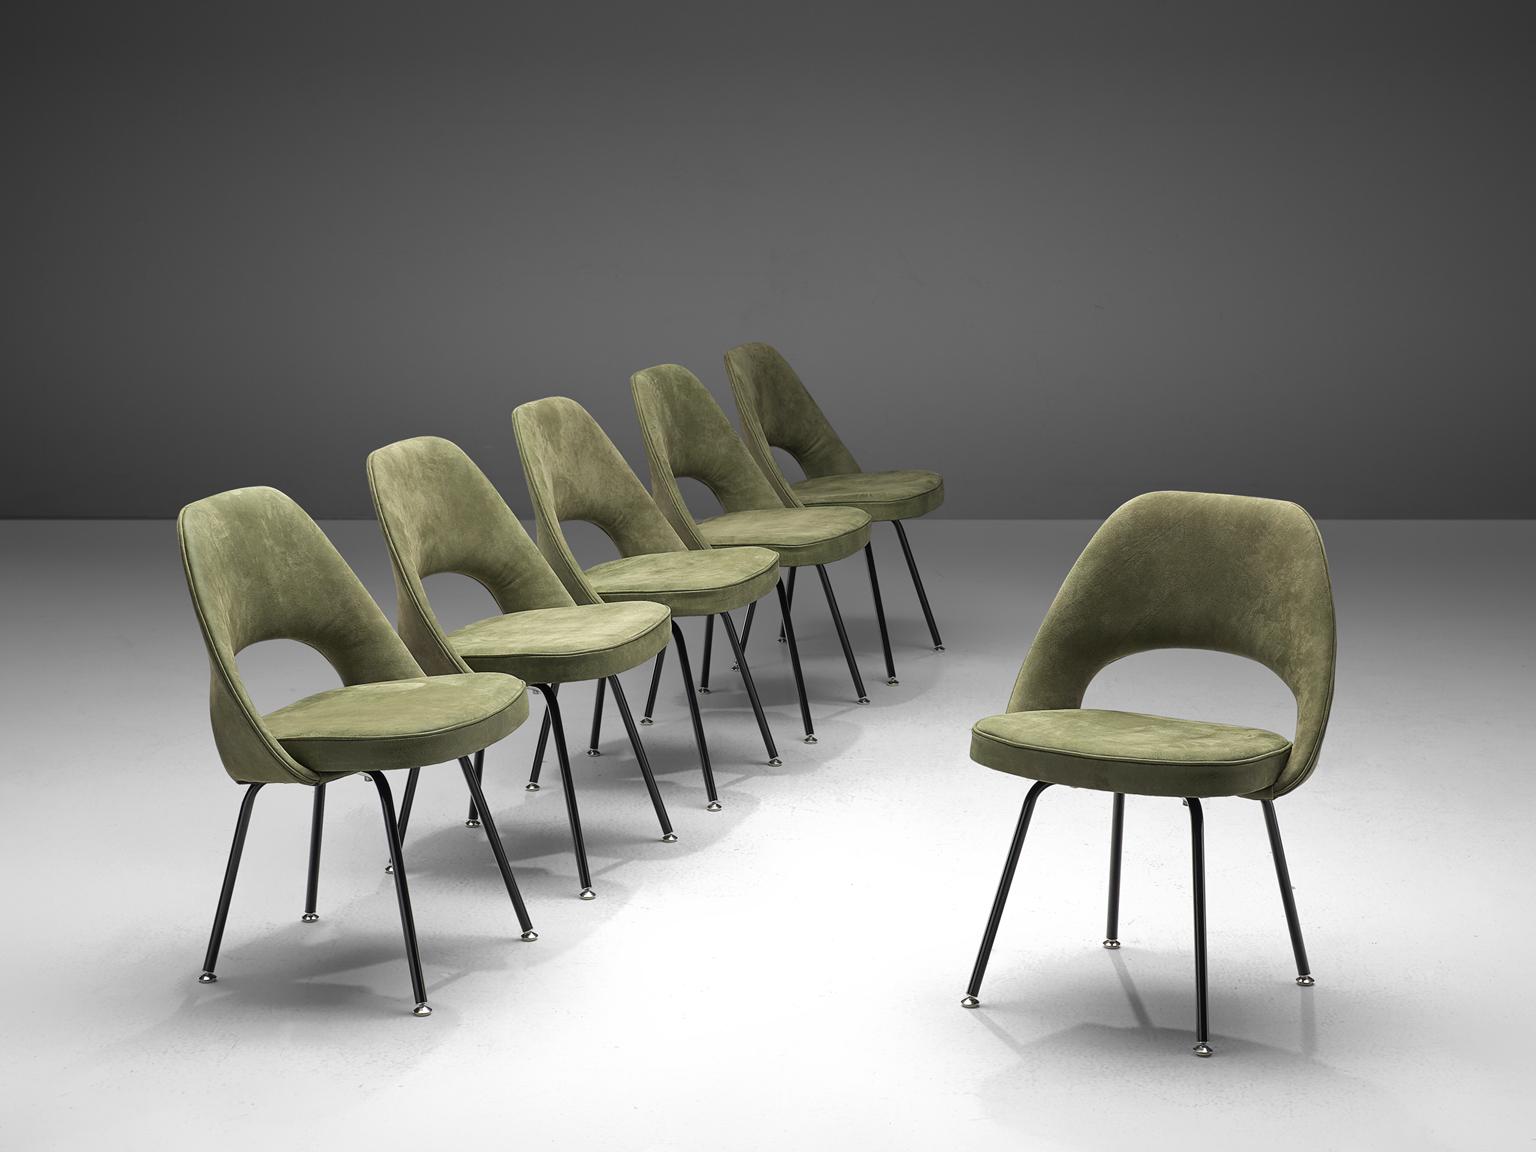 Eero Saarinen for Knoll International, set of six chairs model 72, metal and green suede, United States, 1948. 

Set of six organic shaped chairs designed by Eero Saarinen. This iconic model is reupholstered in high quality green suede. A fluid,